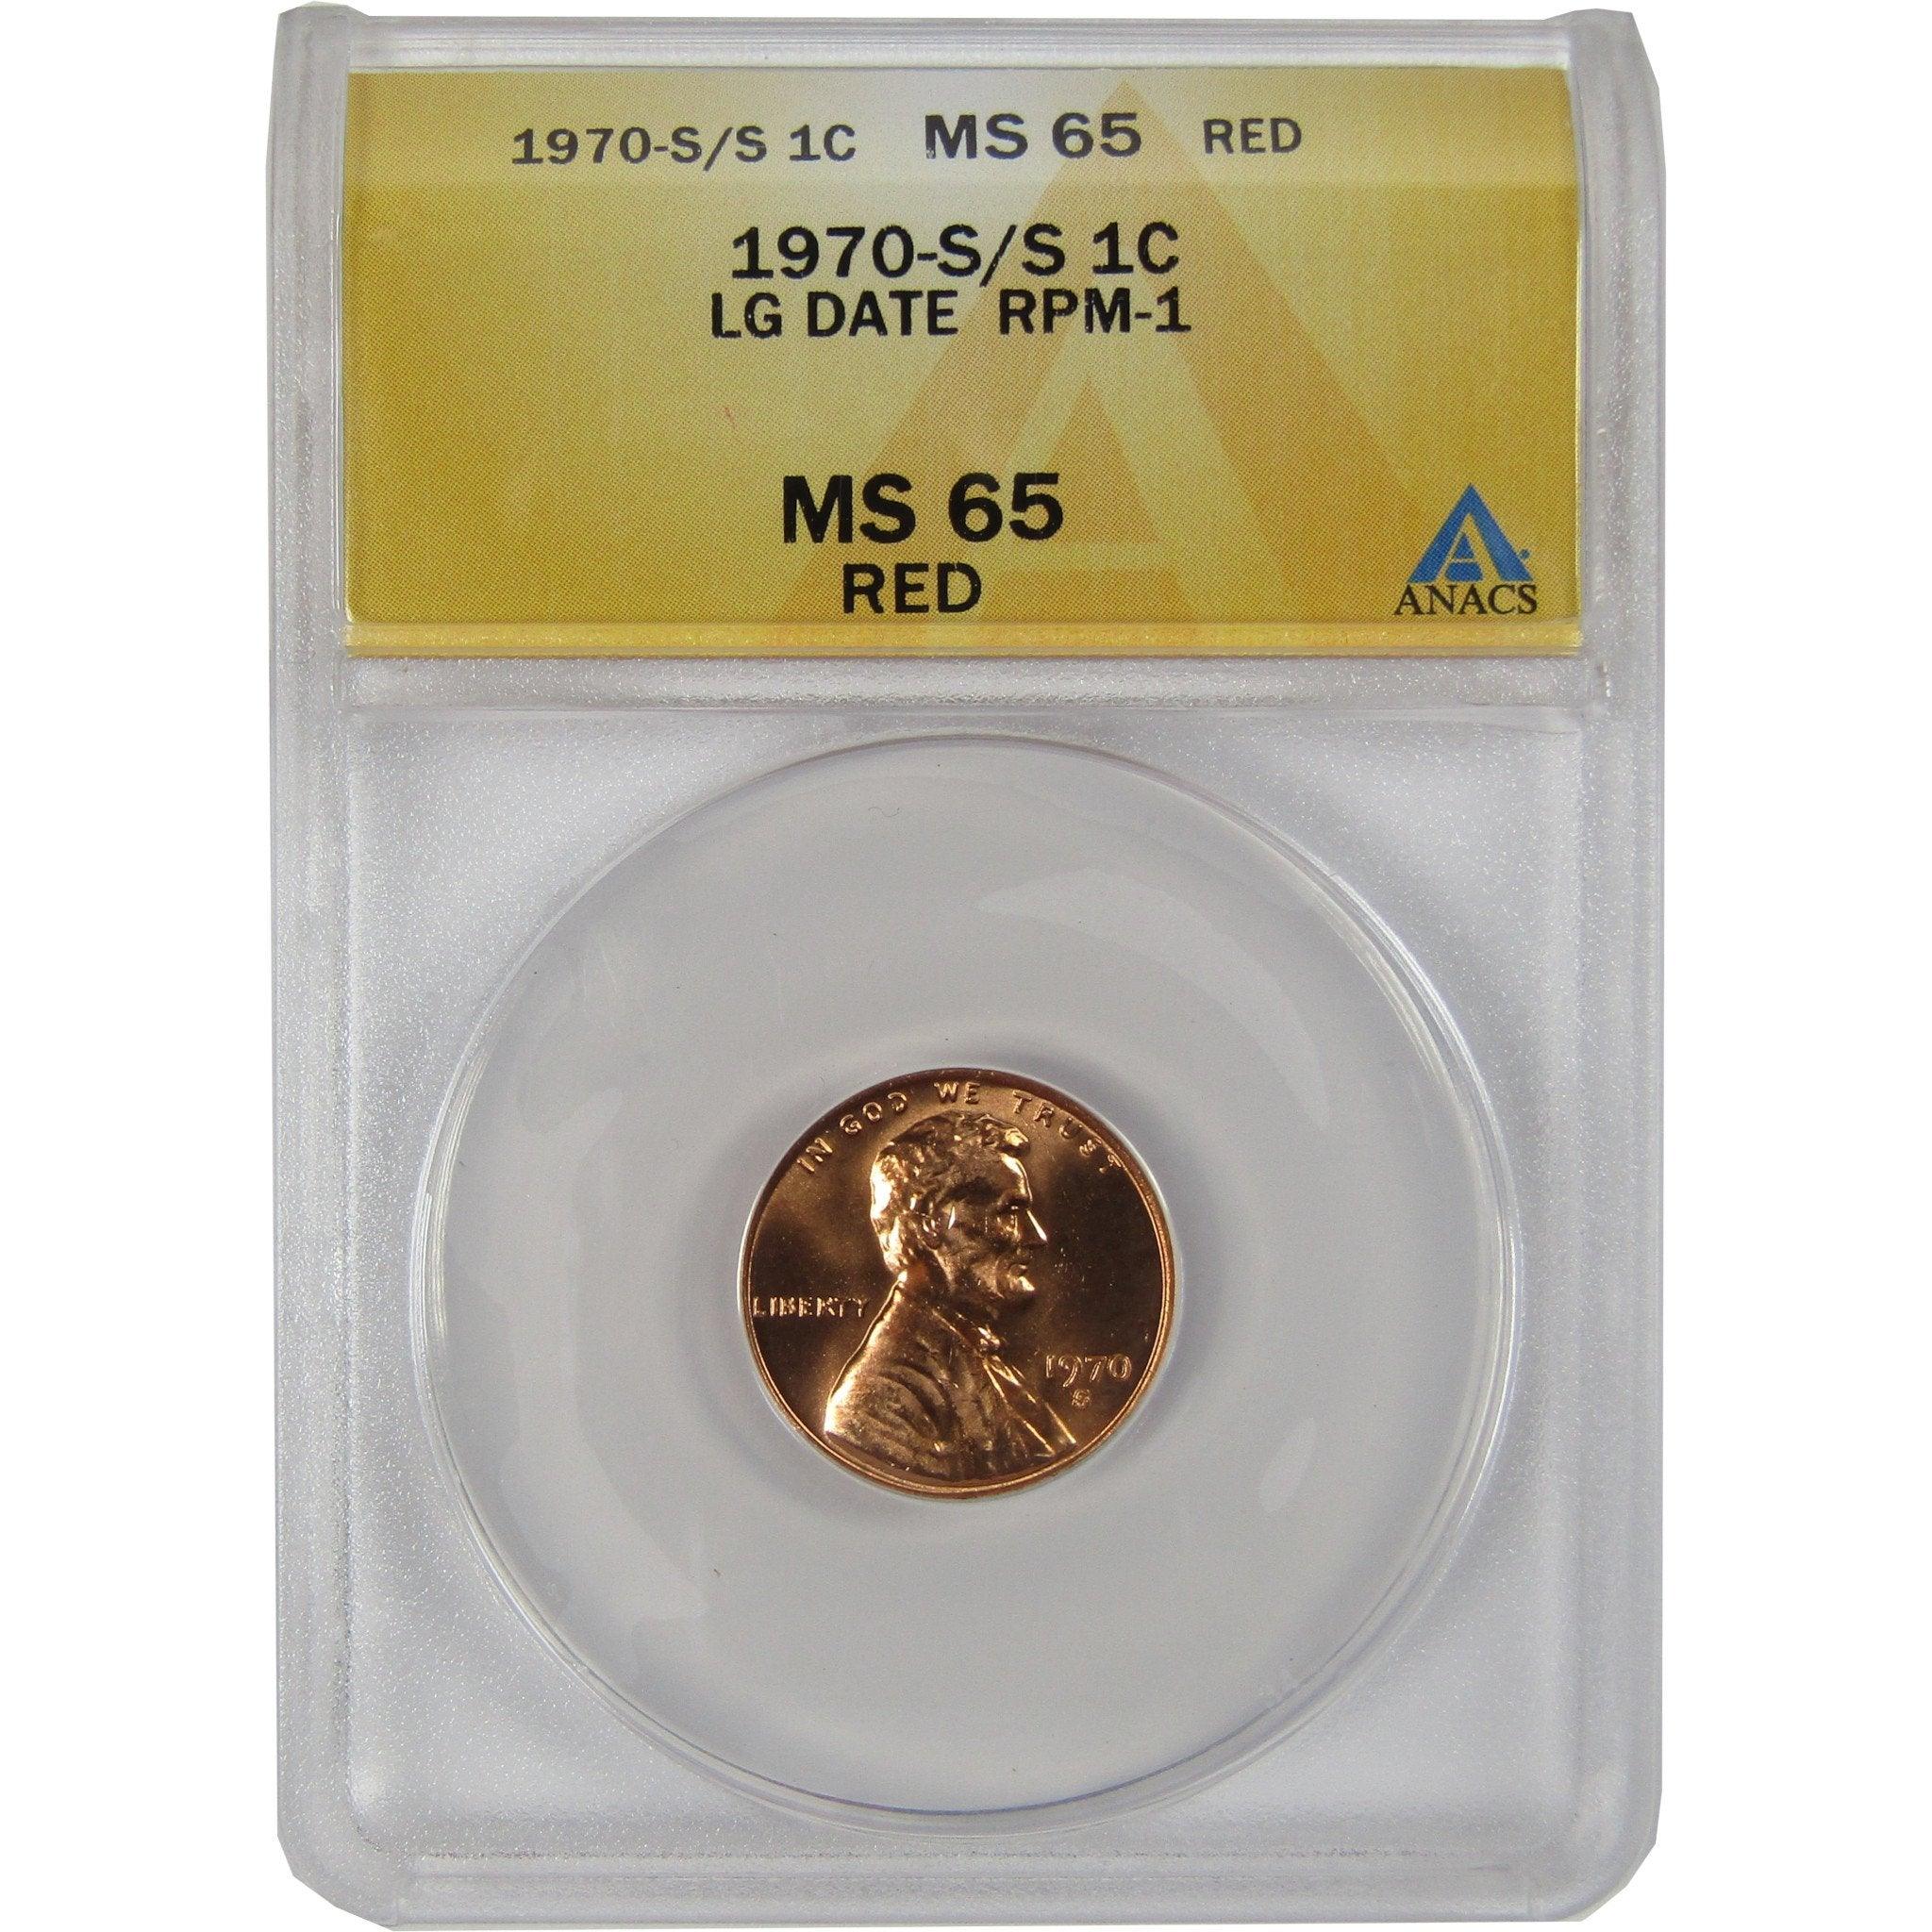 1970 S/S Lg Date Low 7 Lincoln Memorial Cent MS 65 ANACS SKU:CPC1080